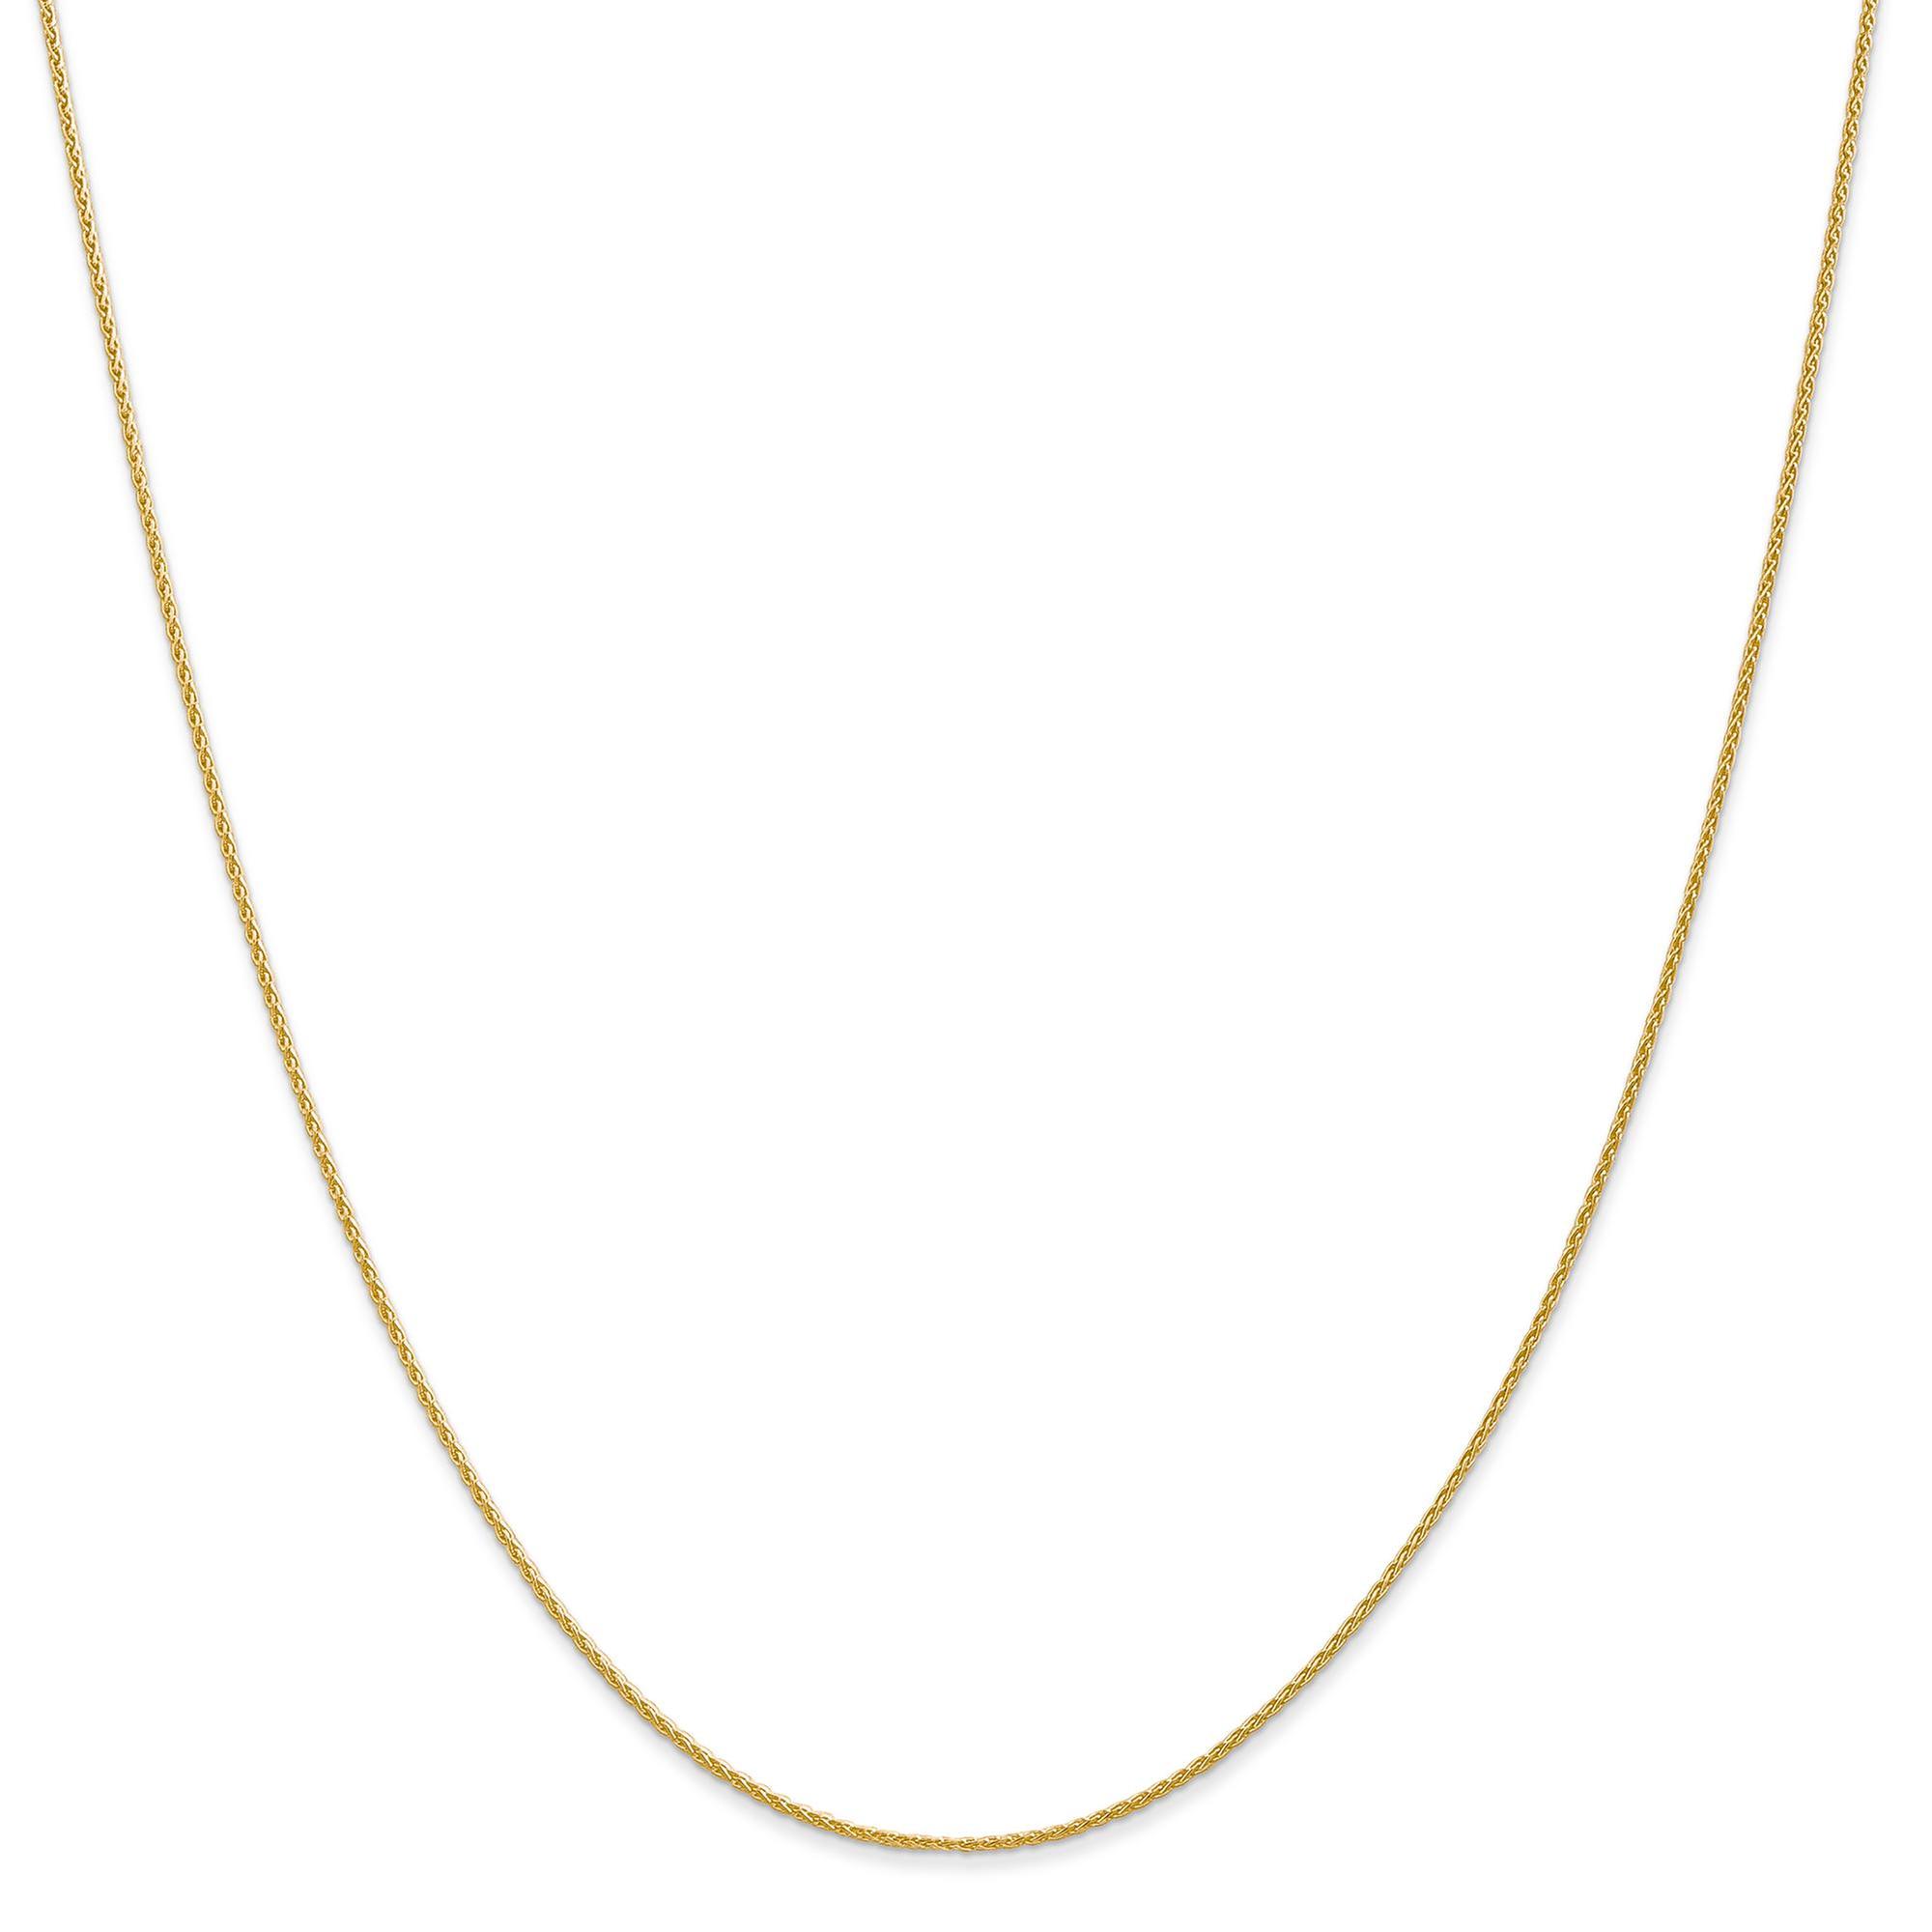 New Square Wheat Spiga Chain Necklace 14k Yellow Gold 0.7mm 